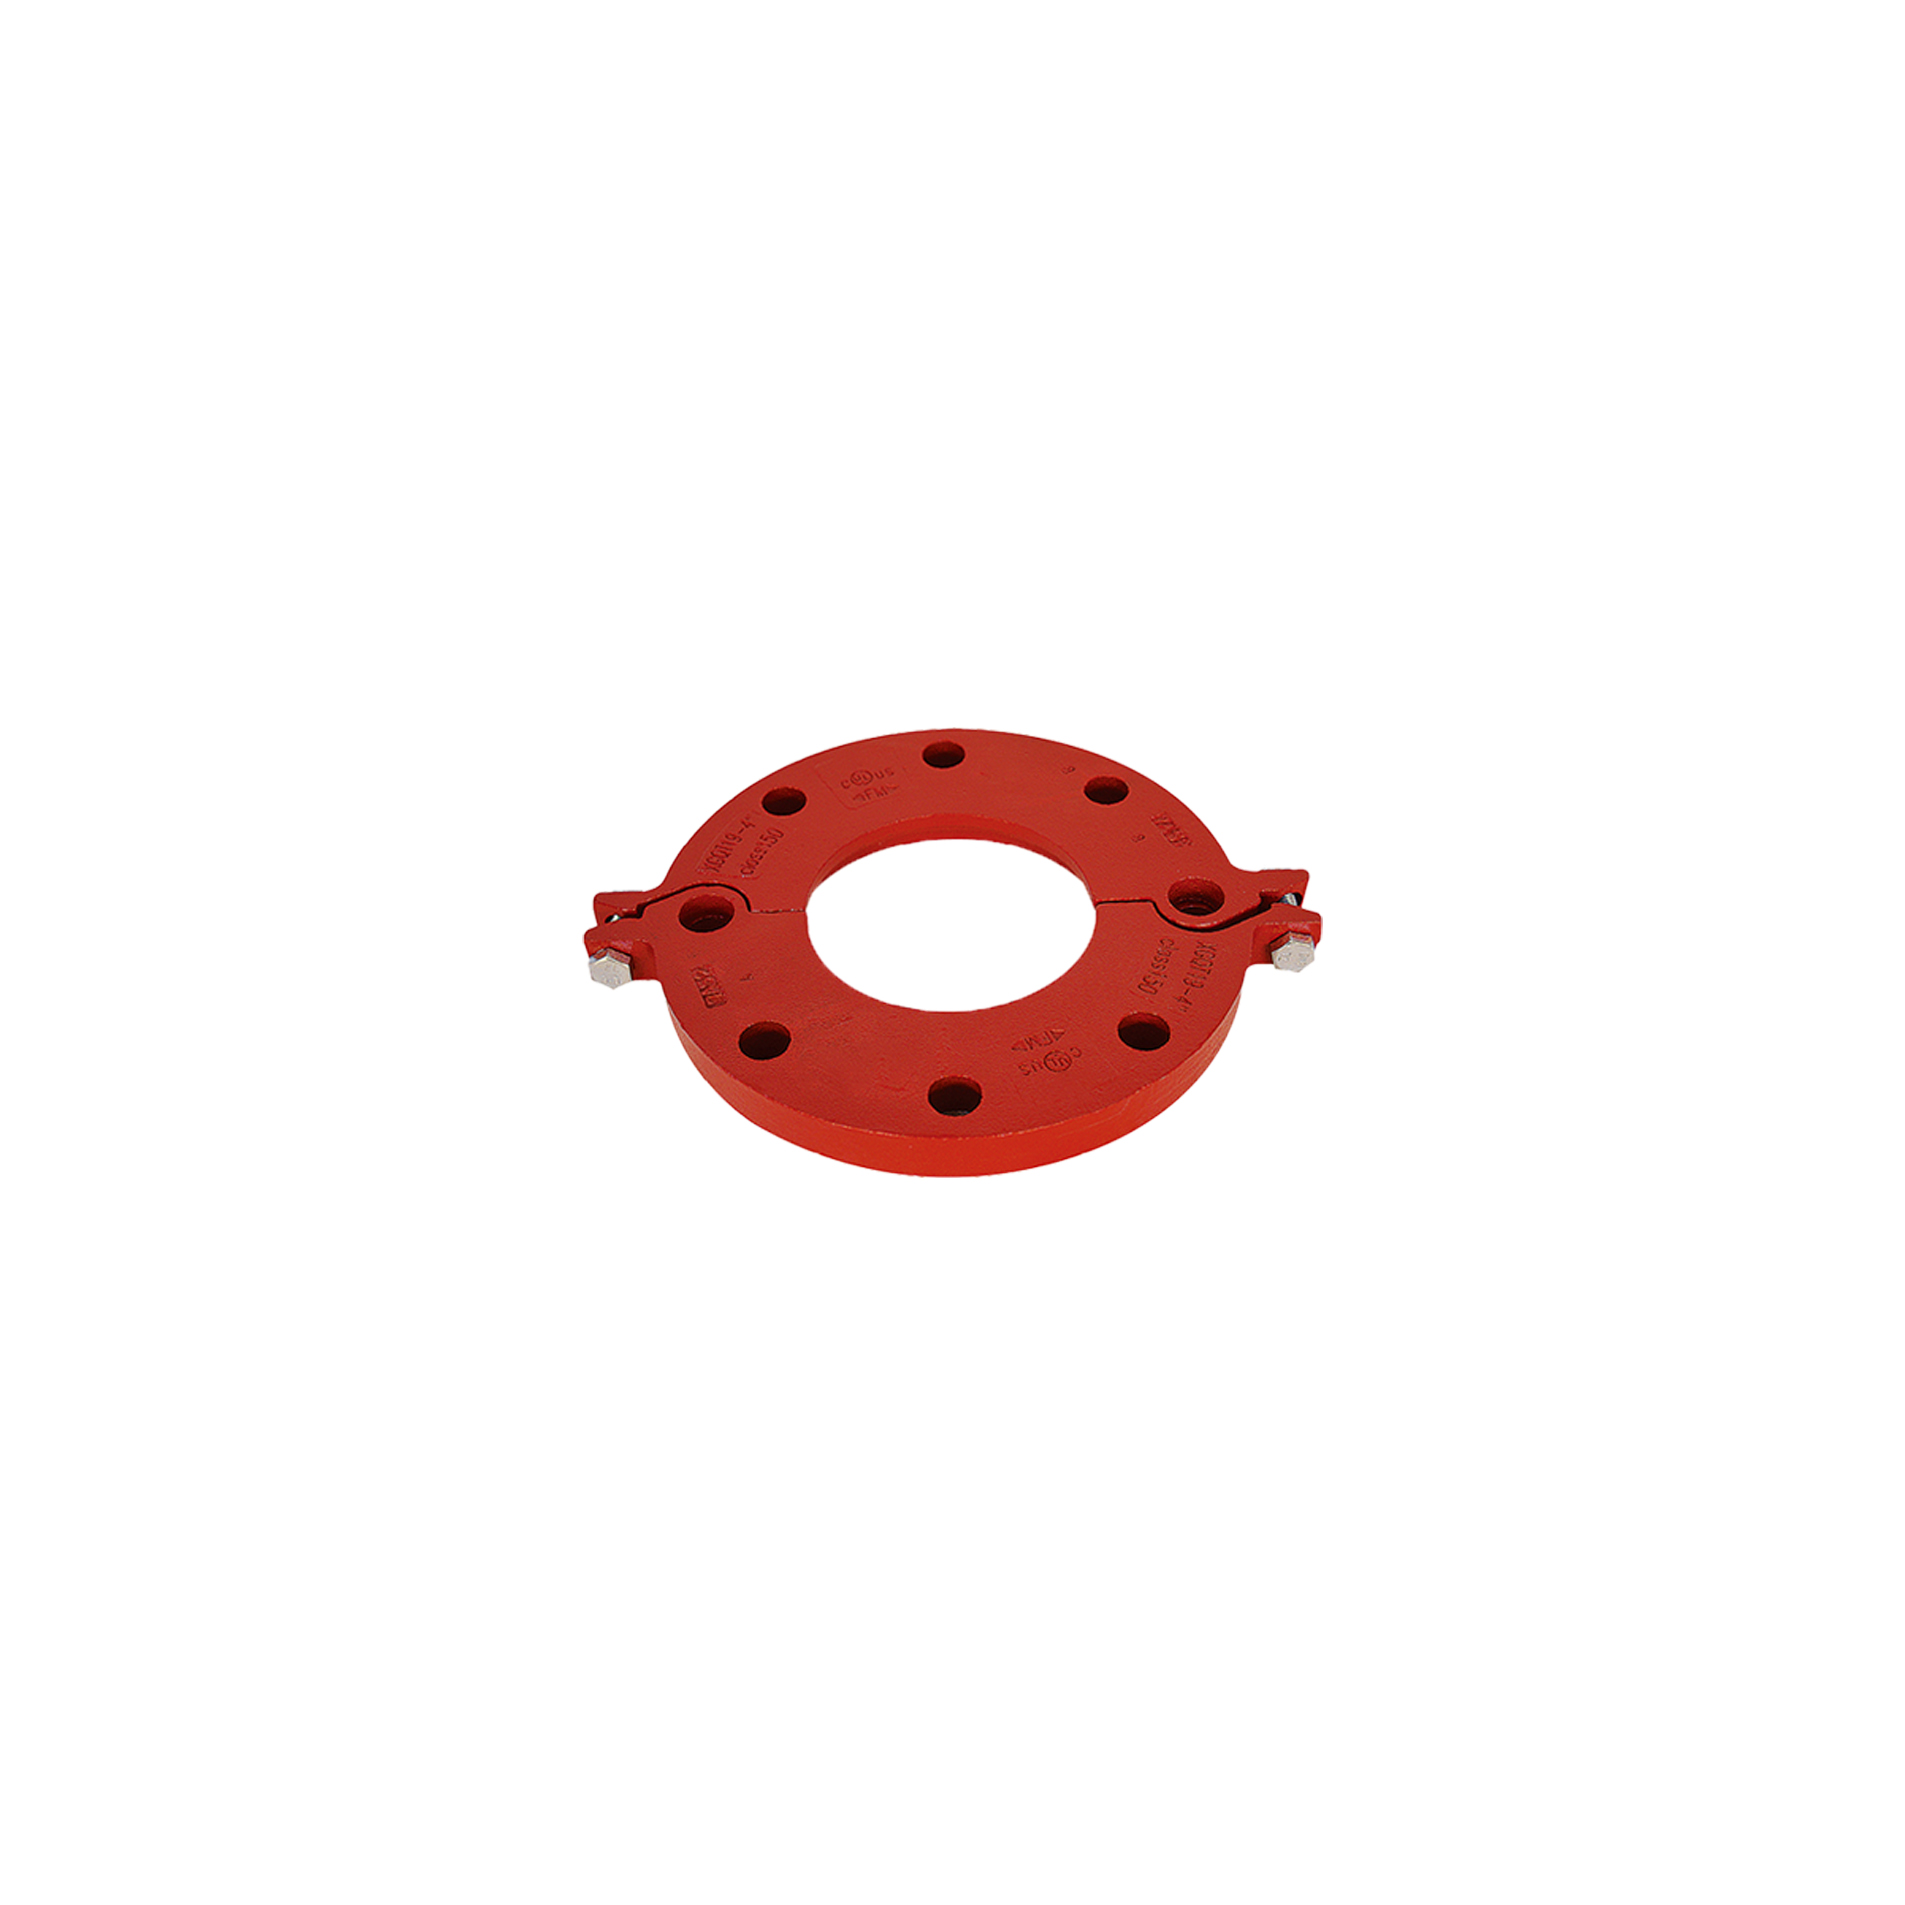 Grooved Flange ANSI Class 150 Grooved Fittings | Grooved Pipe Fittings | Grooved Fittings Manufacturer